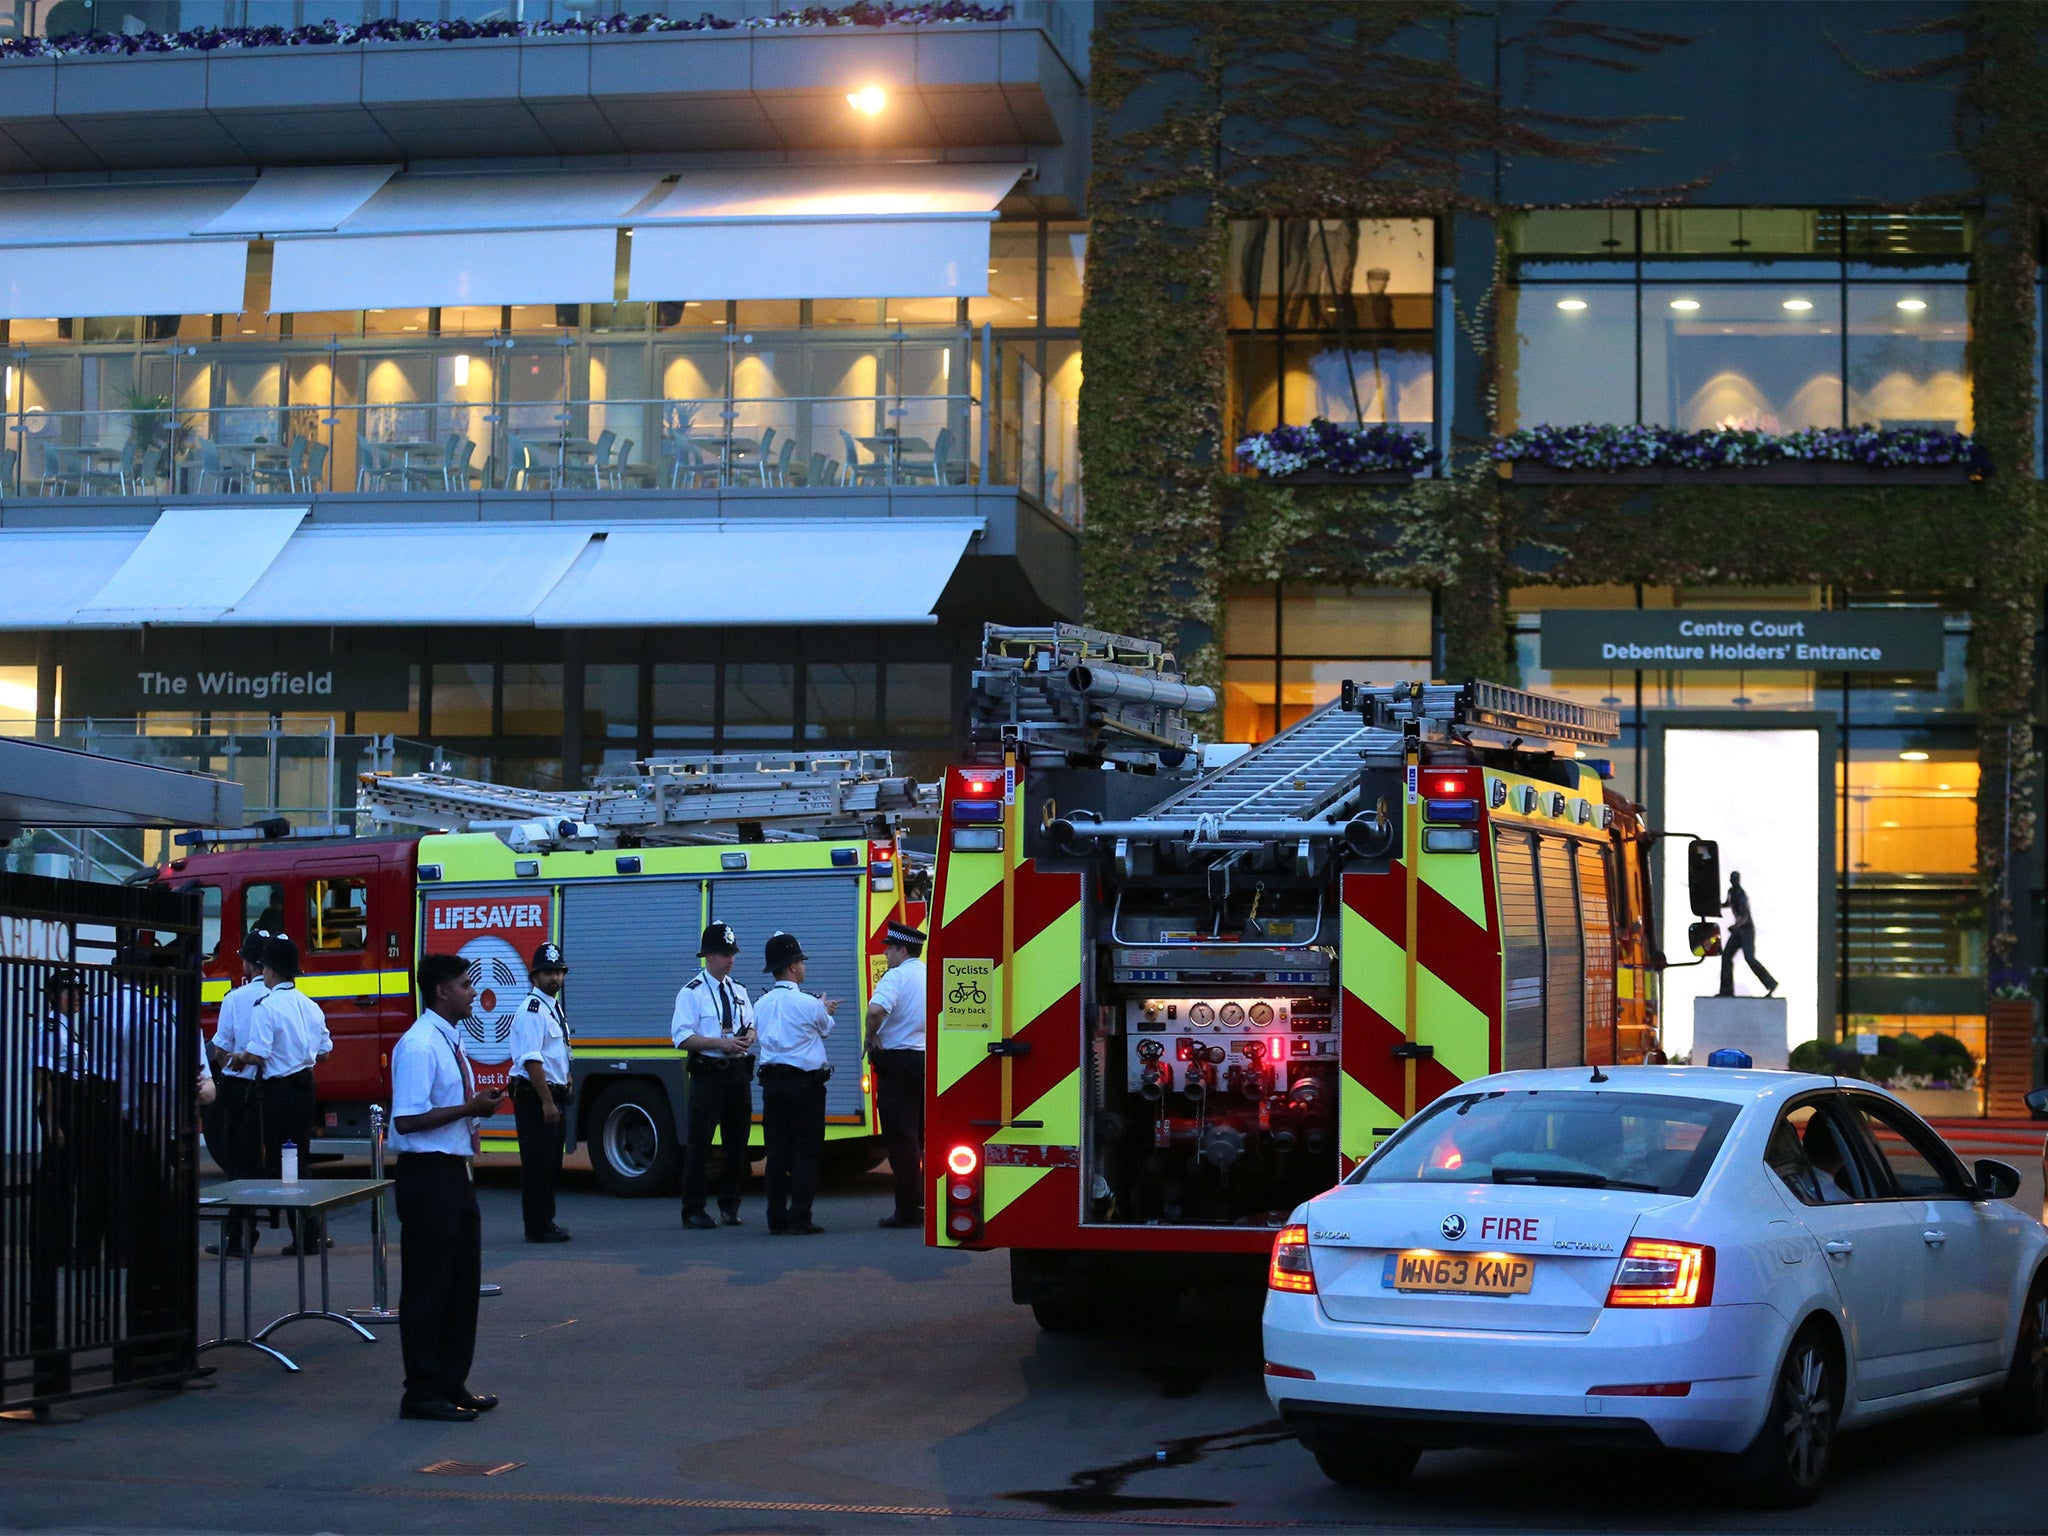 Fire engines outside Wimbledon following the evacuation of centre court